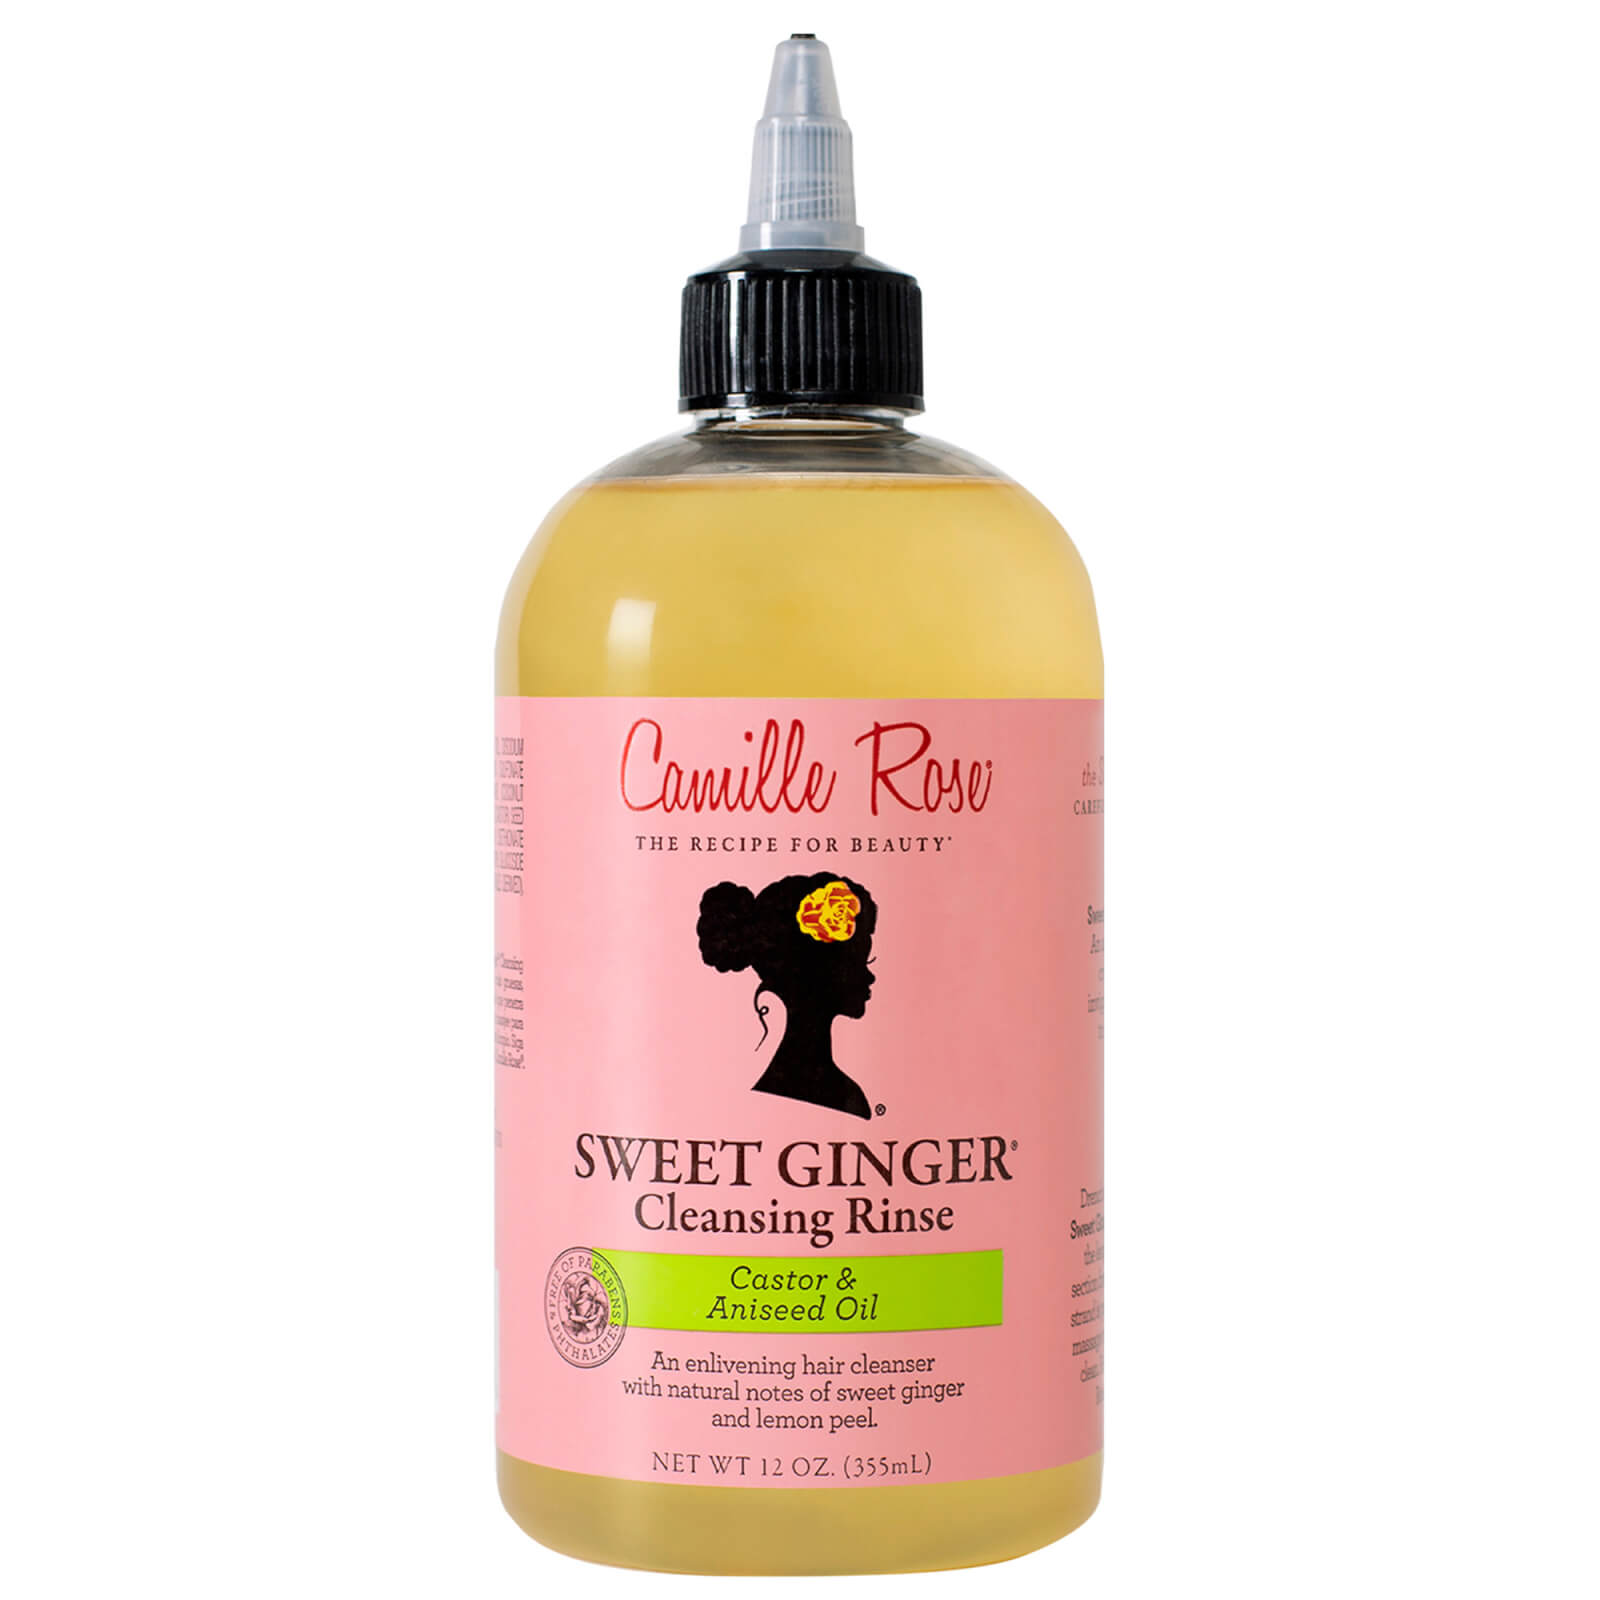 Image of Camille Rose Sweet Ginger Cleansing Rinse Shampoo 355ml